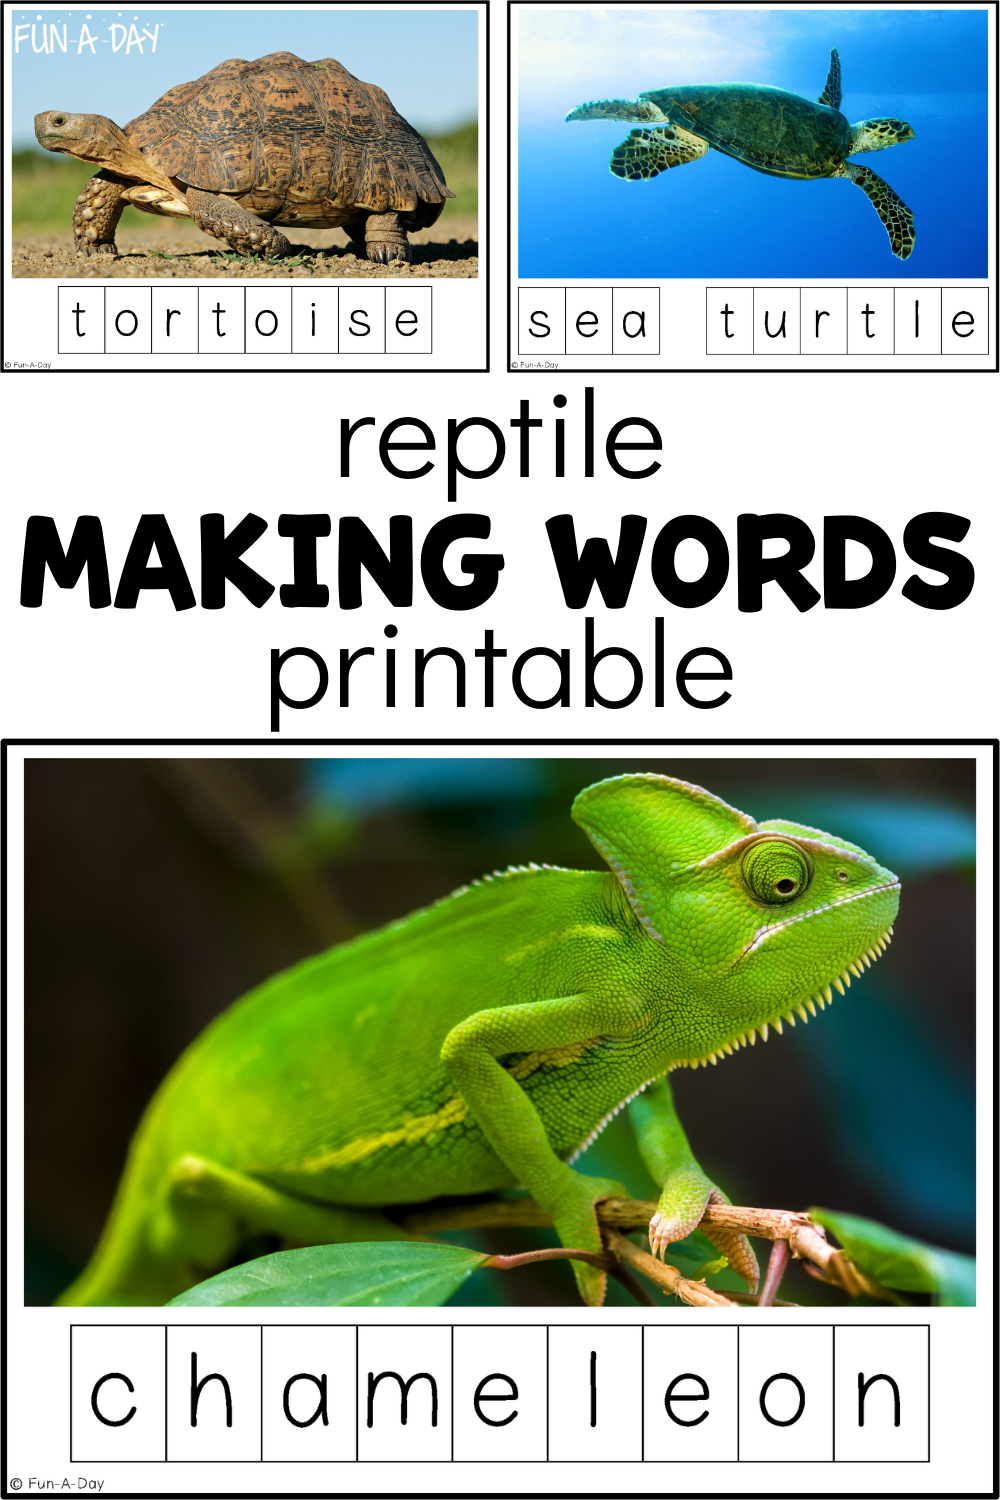 Tortoise, sea turtle, and chameleon word cards with text that reads reptile making words printable